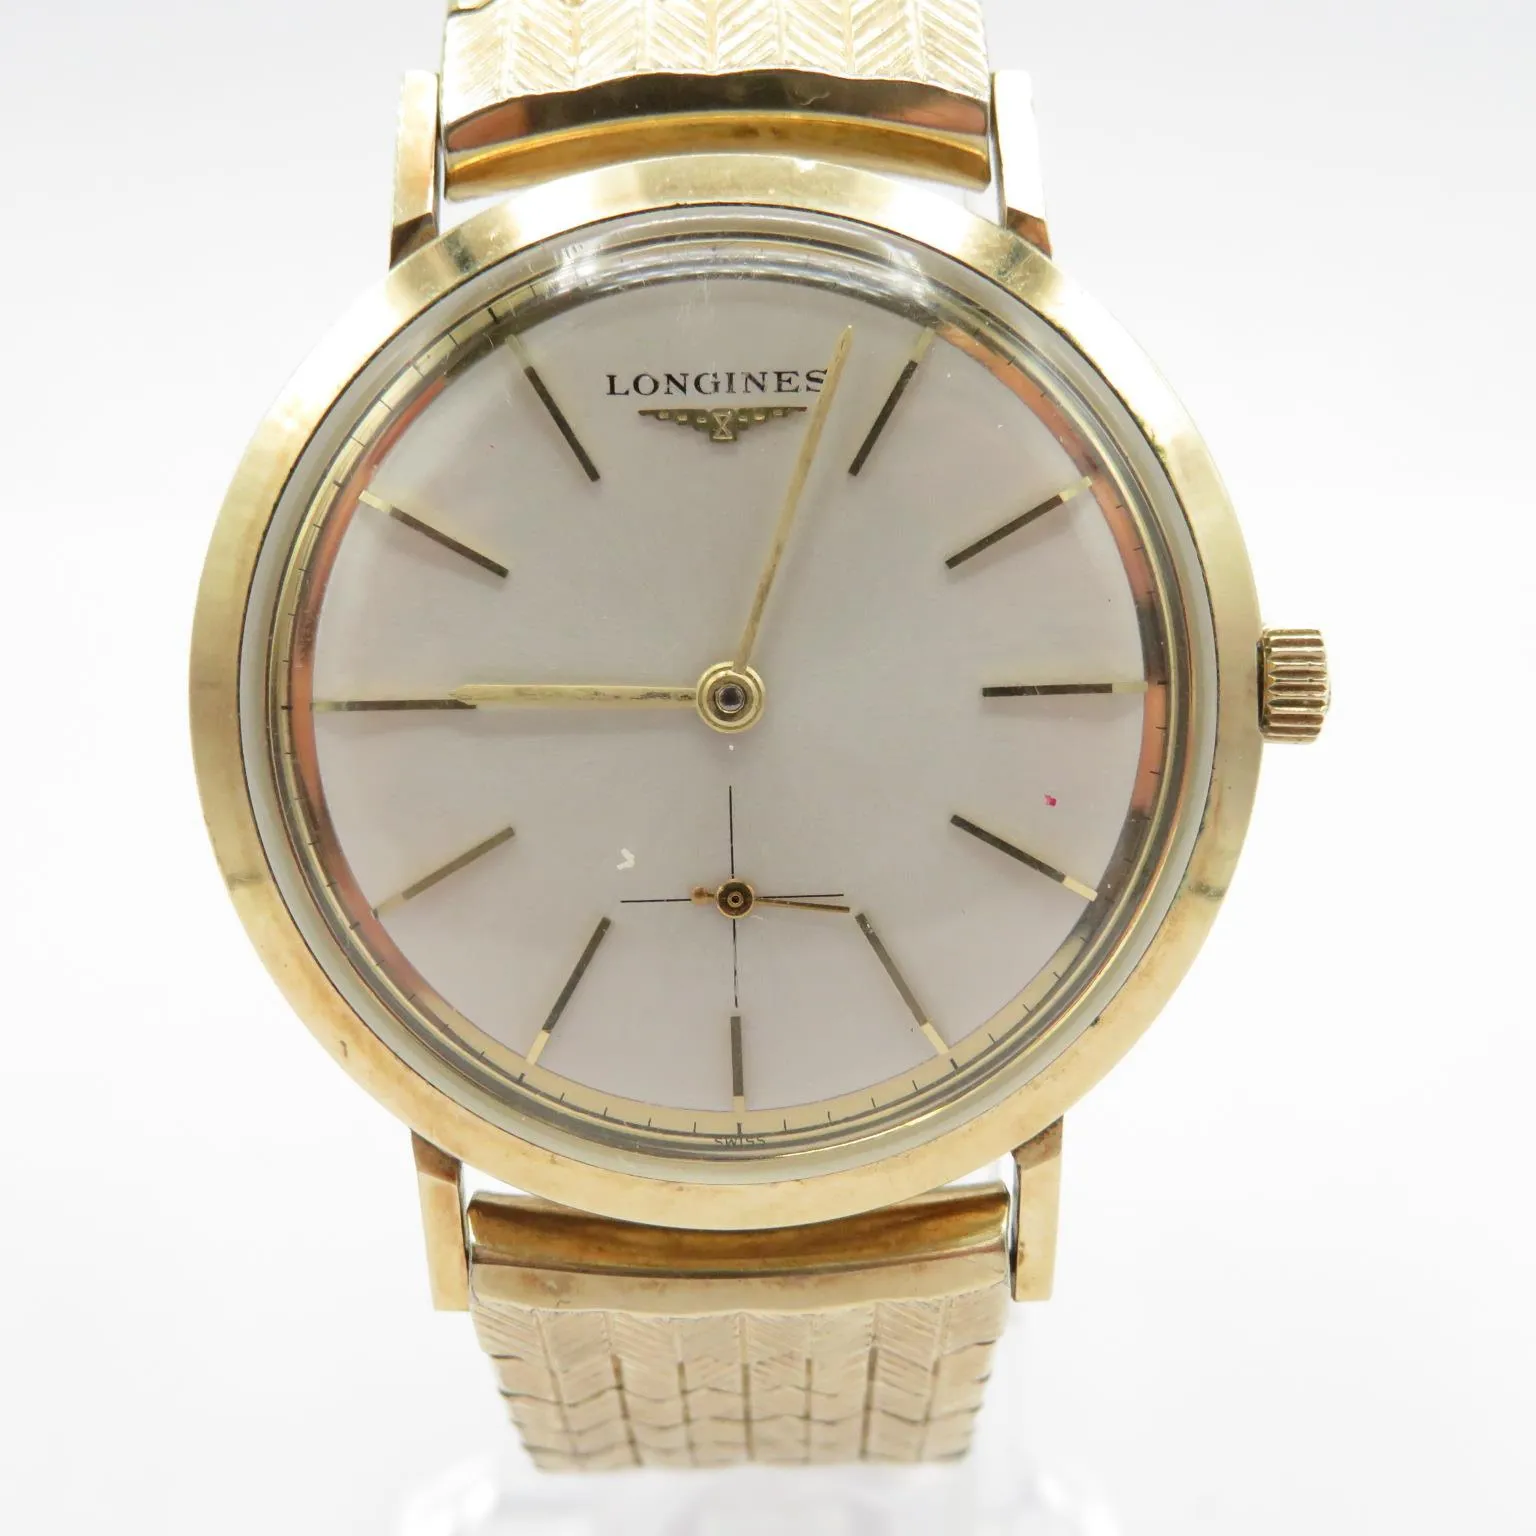 Longines 1200 Gold-filled 1